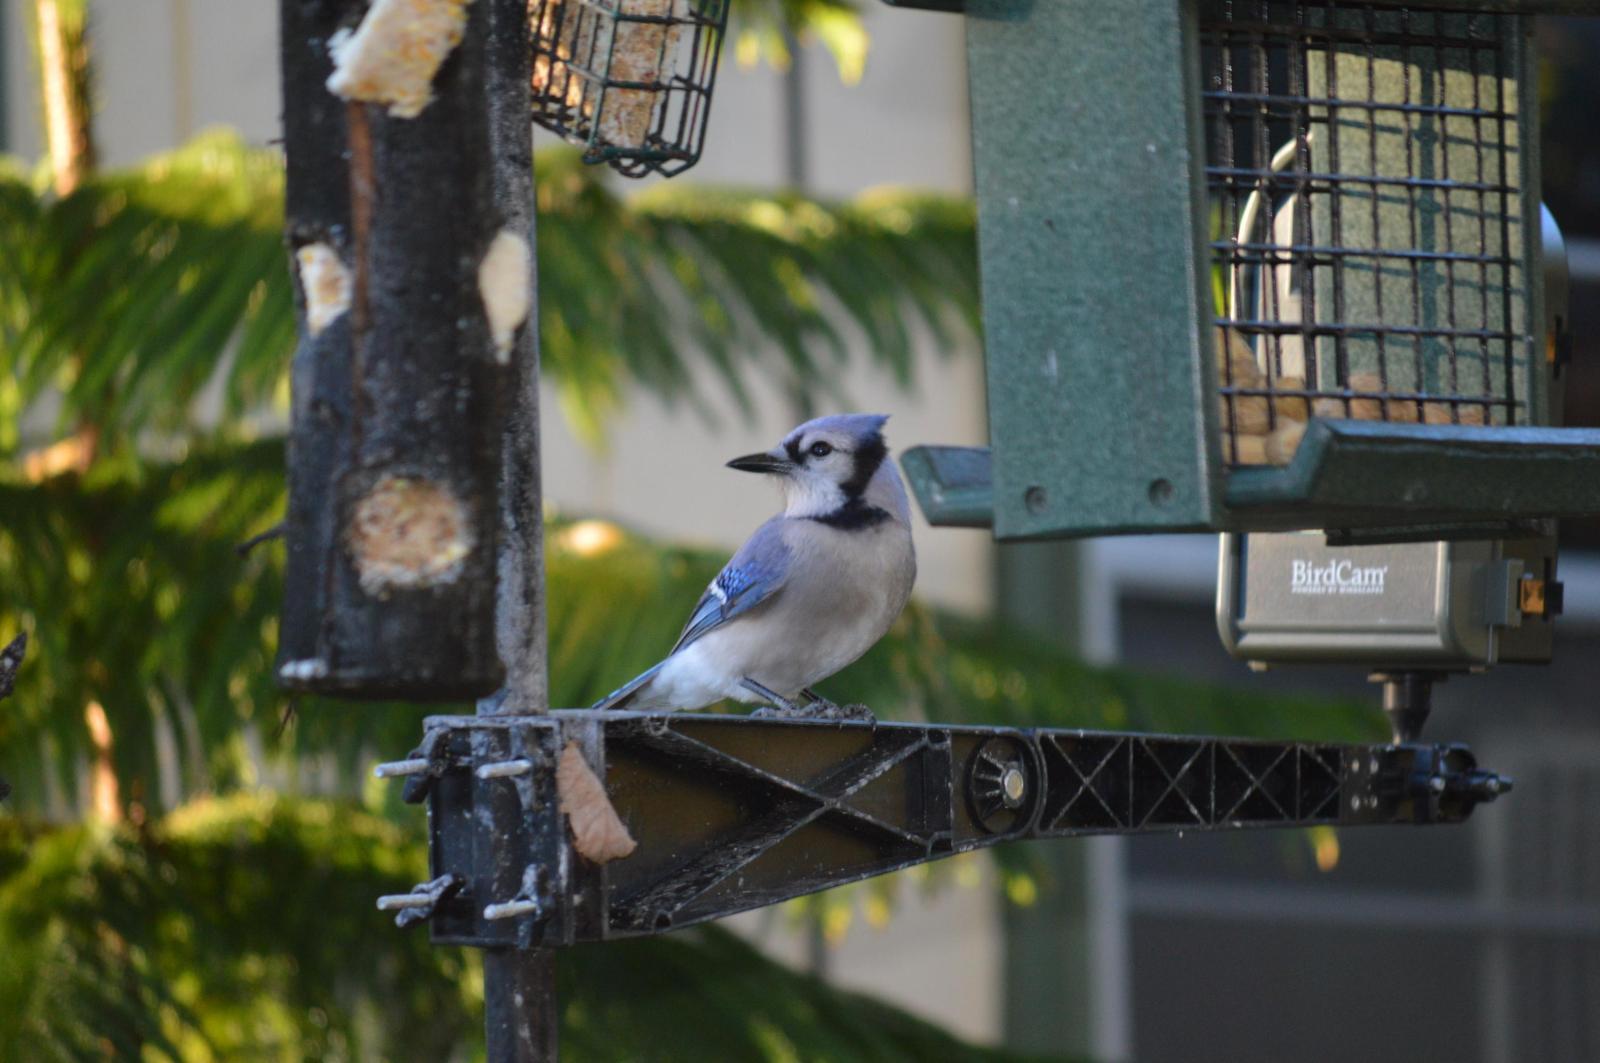 Blue Jay Photo by Mike Ballentine